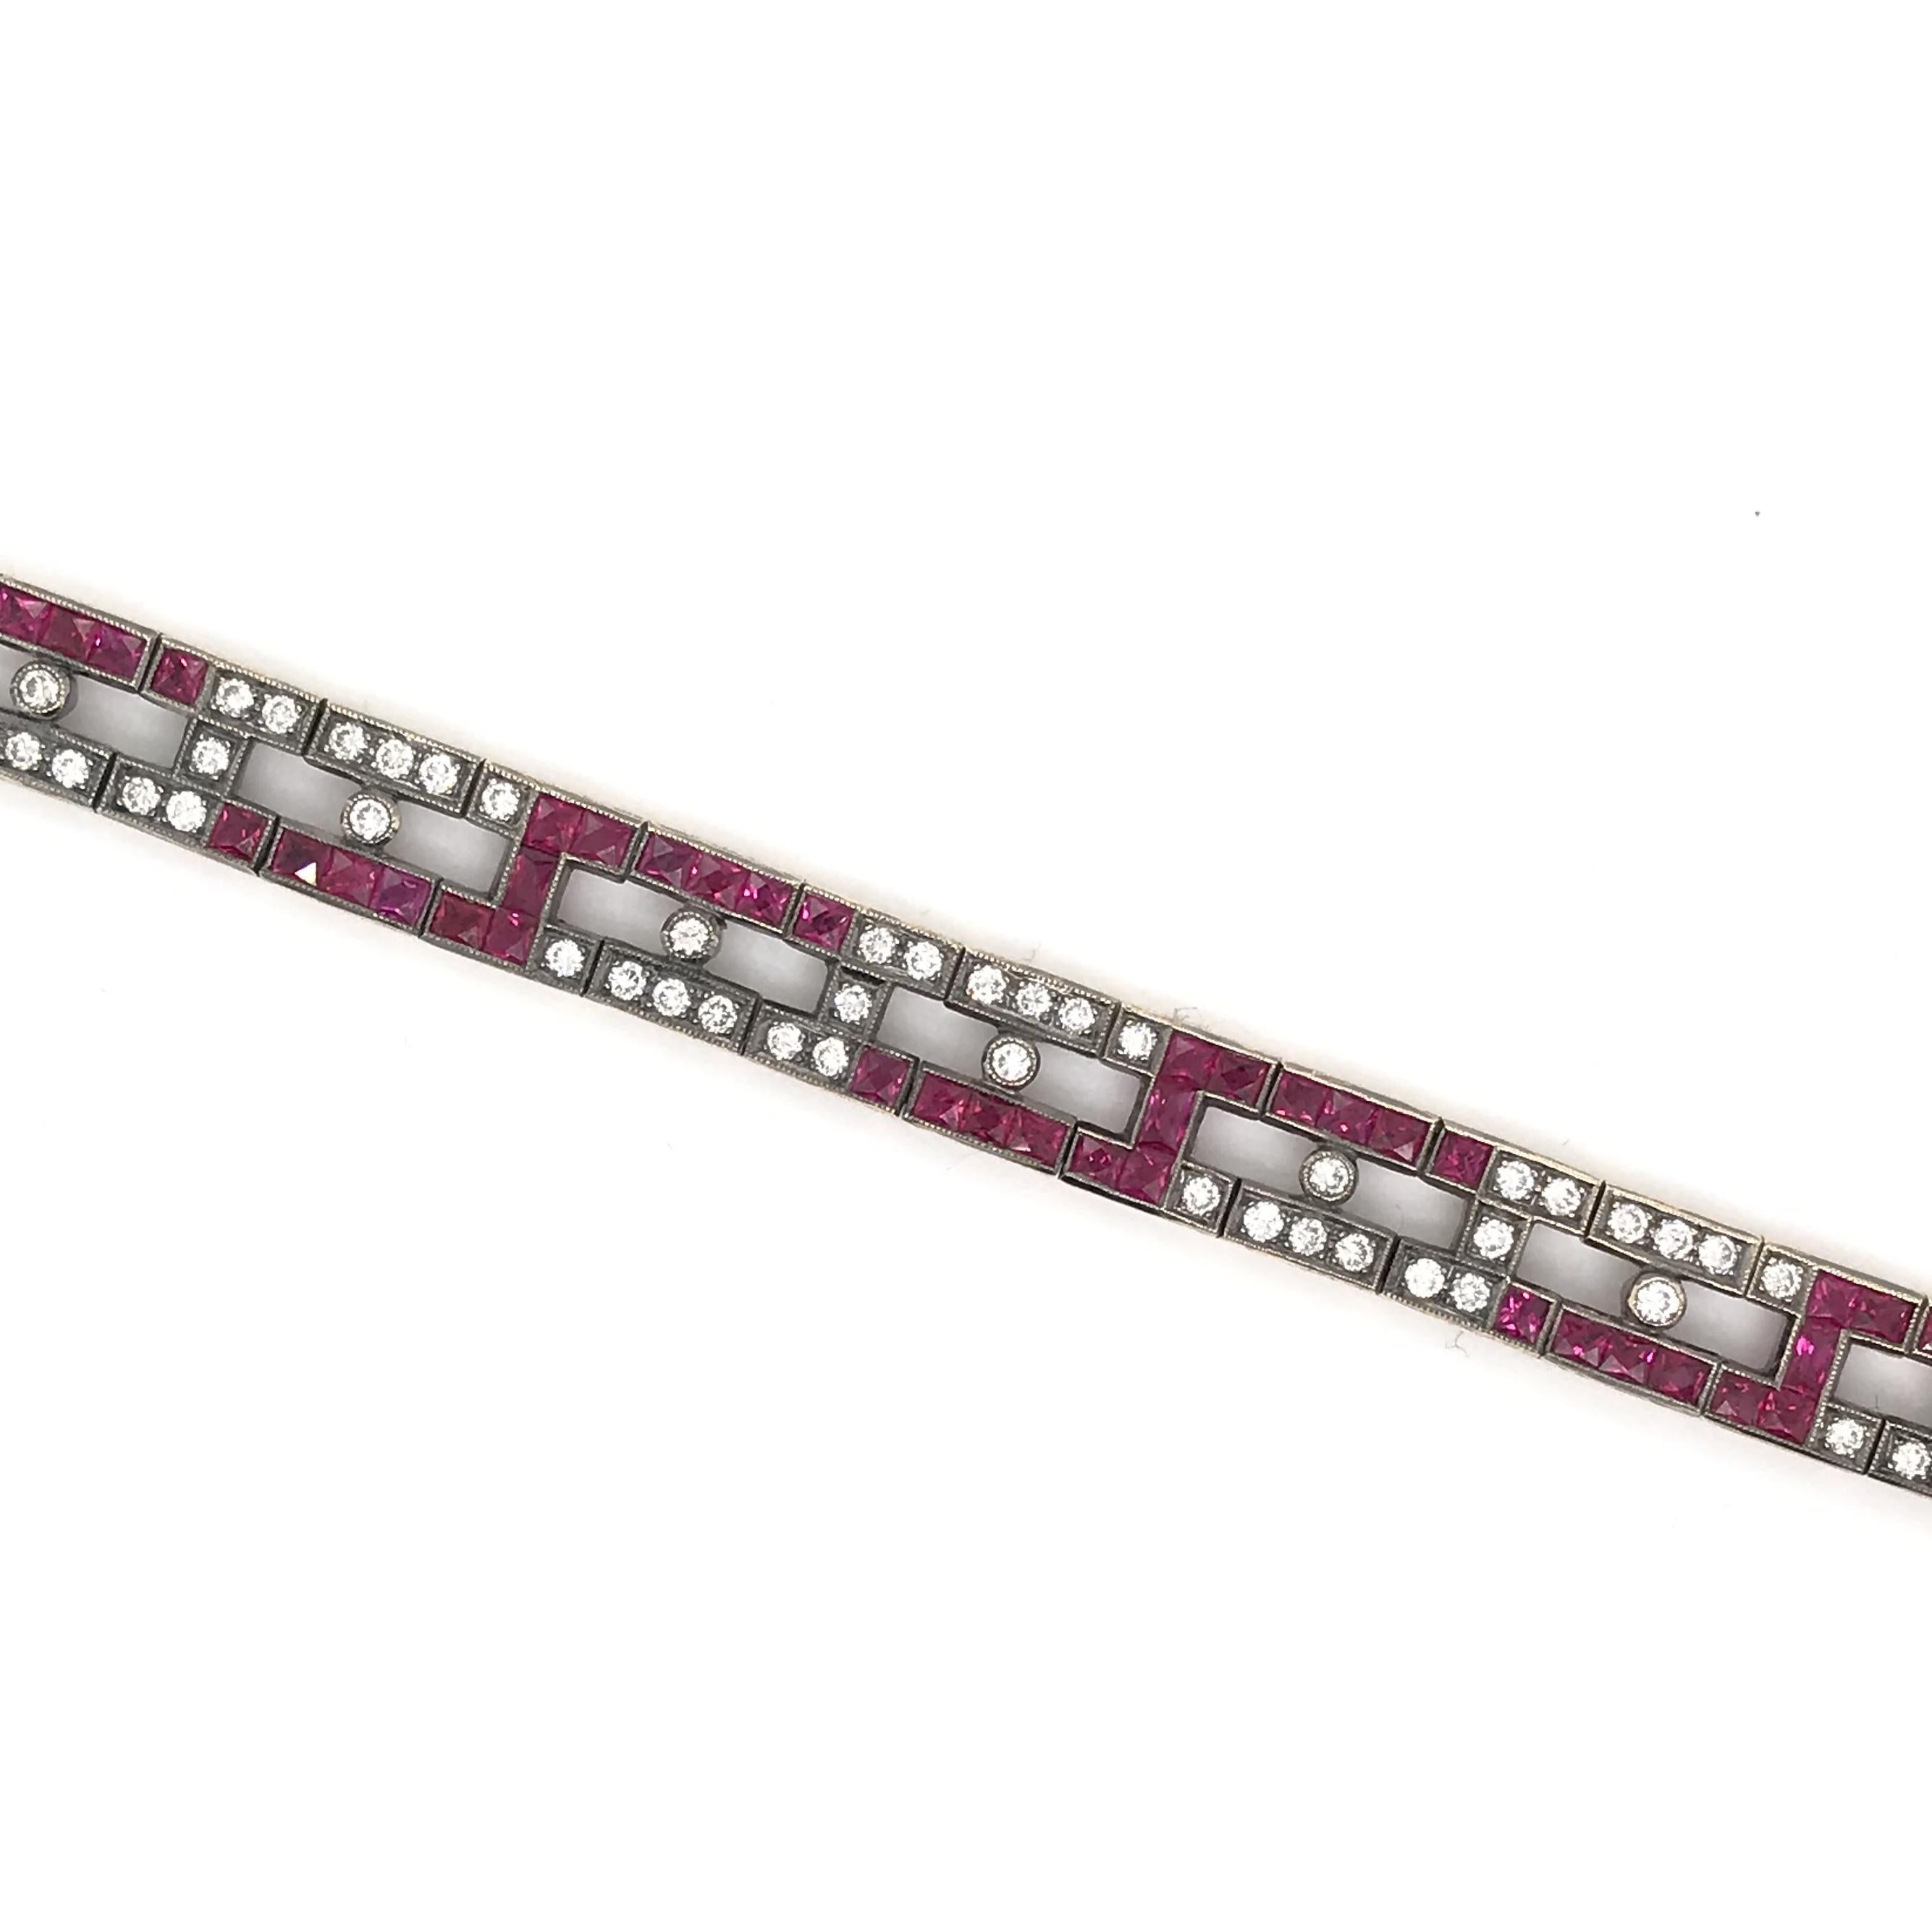 This contemporary ruby and diamond bracelet features approximately 4 carats of rubies and 1.50 carats of diamonds. The motif is distinctly Deco inspired with its clean lines, french cut rubies, and geometrical design. The bracelet is 18K yellow gold